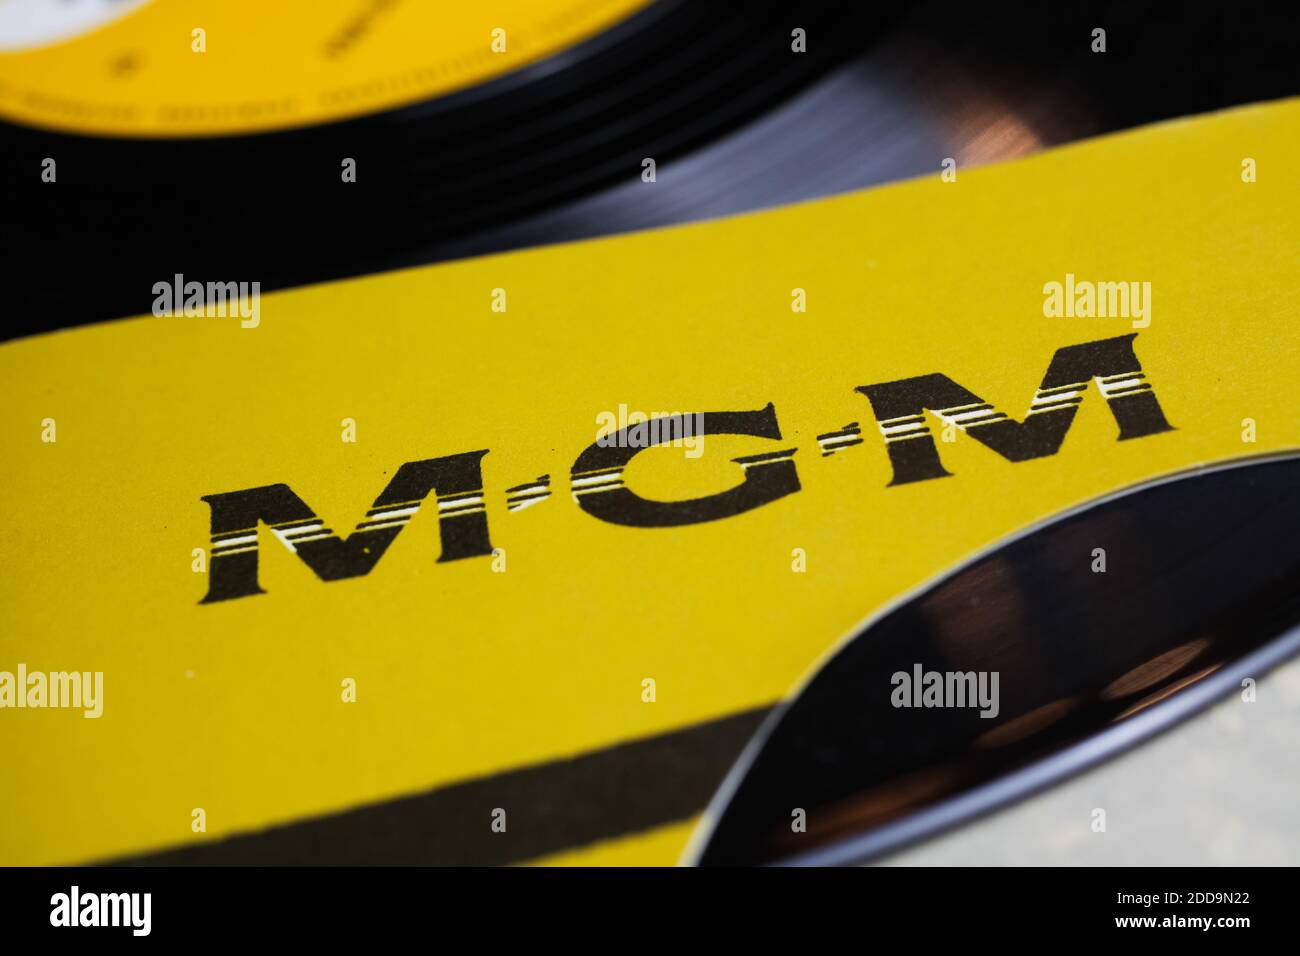 Viersen, Germany - May 9. 2020: Close up of isolated vinyl single record cover with logo from mgm music label Stock Photo